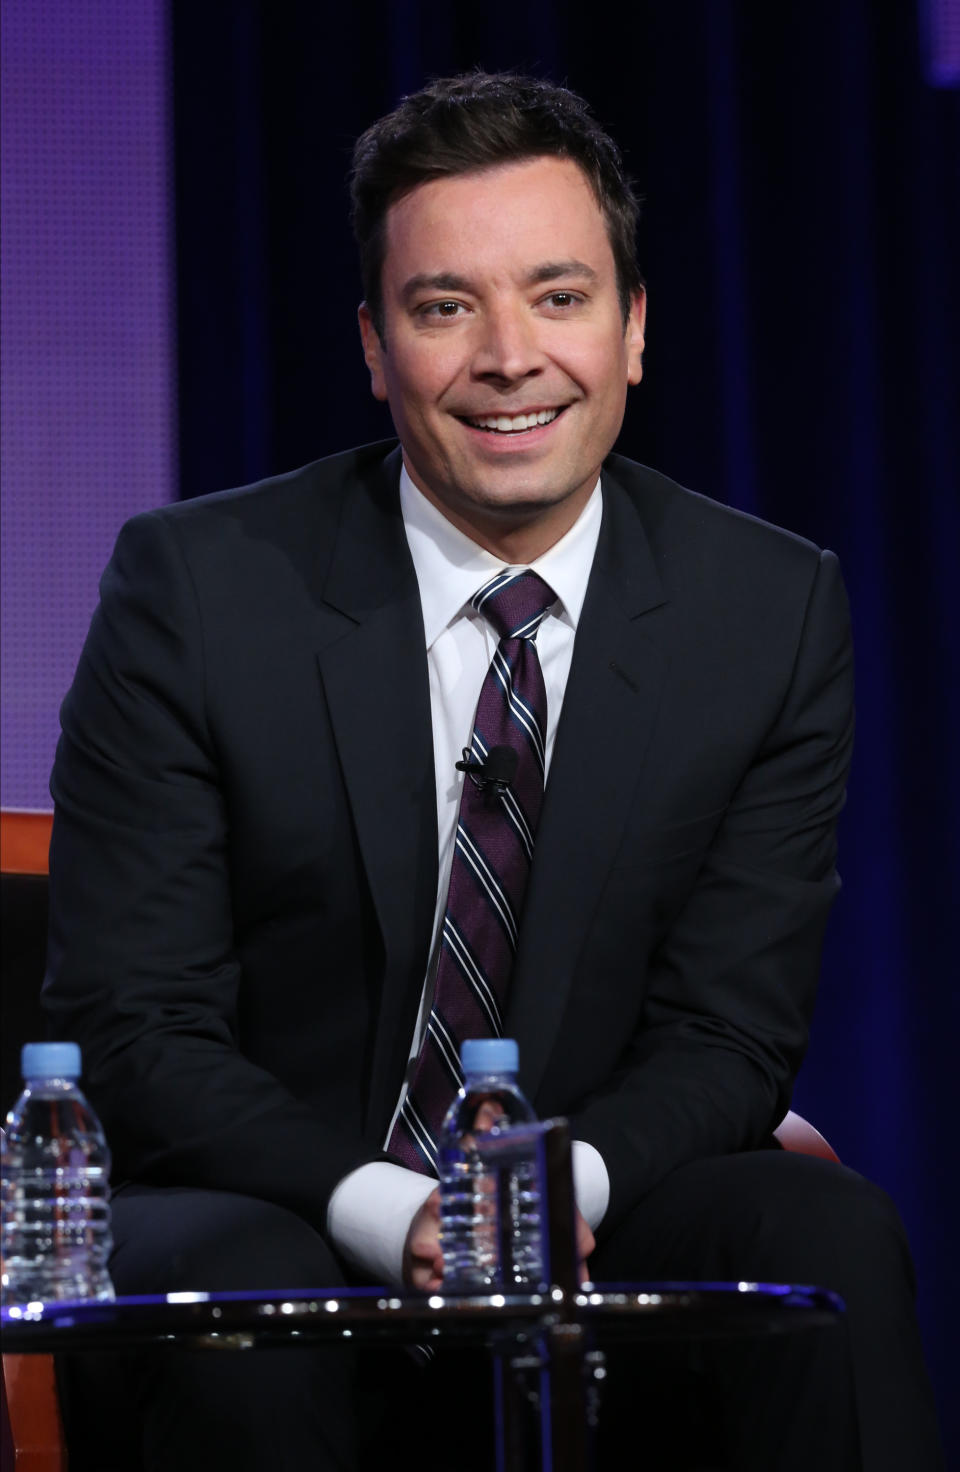 This photo released by NBC shows Jimmy Fallon who will be the new host of "Tonight Show Starring Jimmy Fallon". (AP Photo/NBC, Chris Haston)